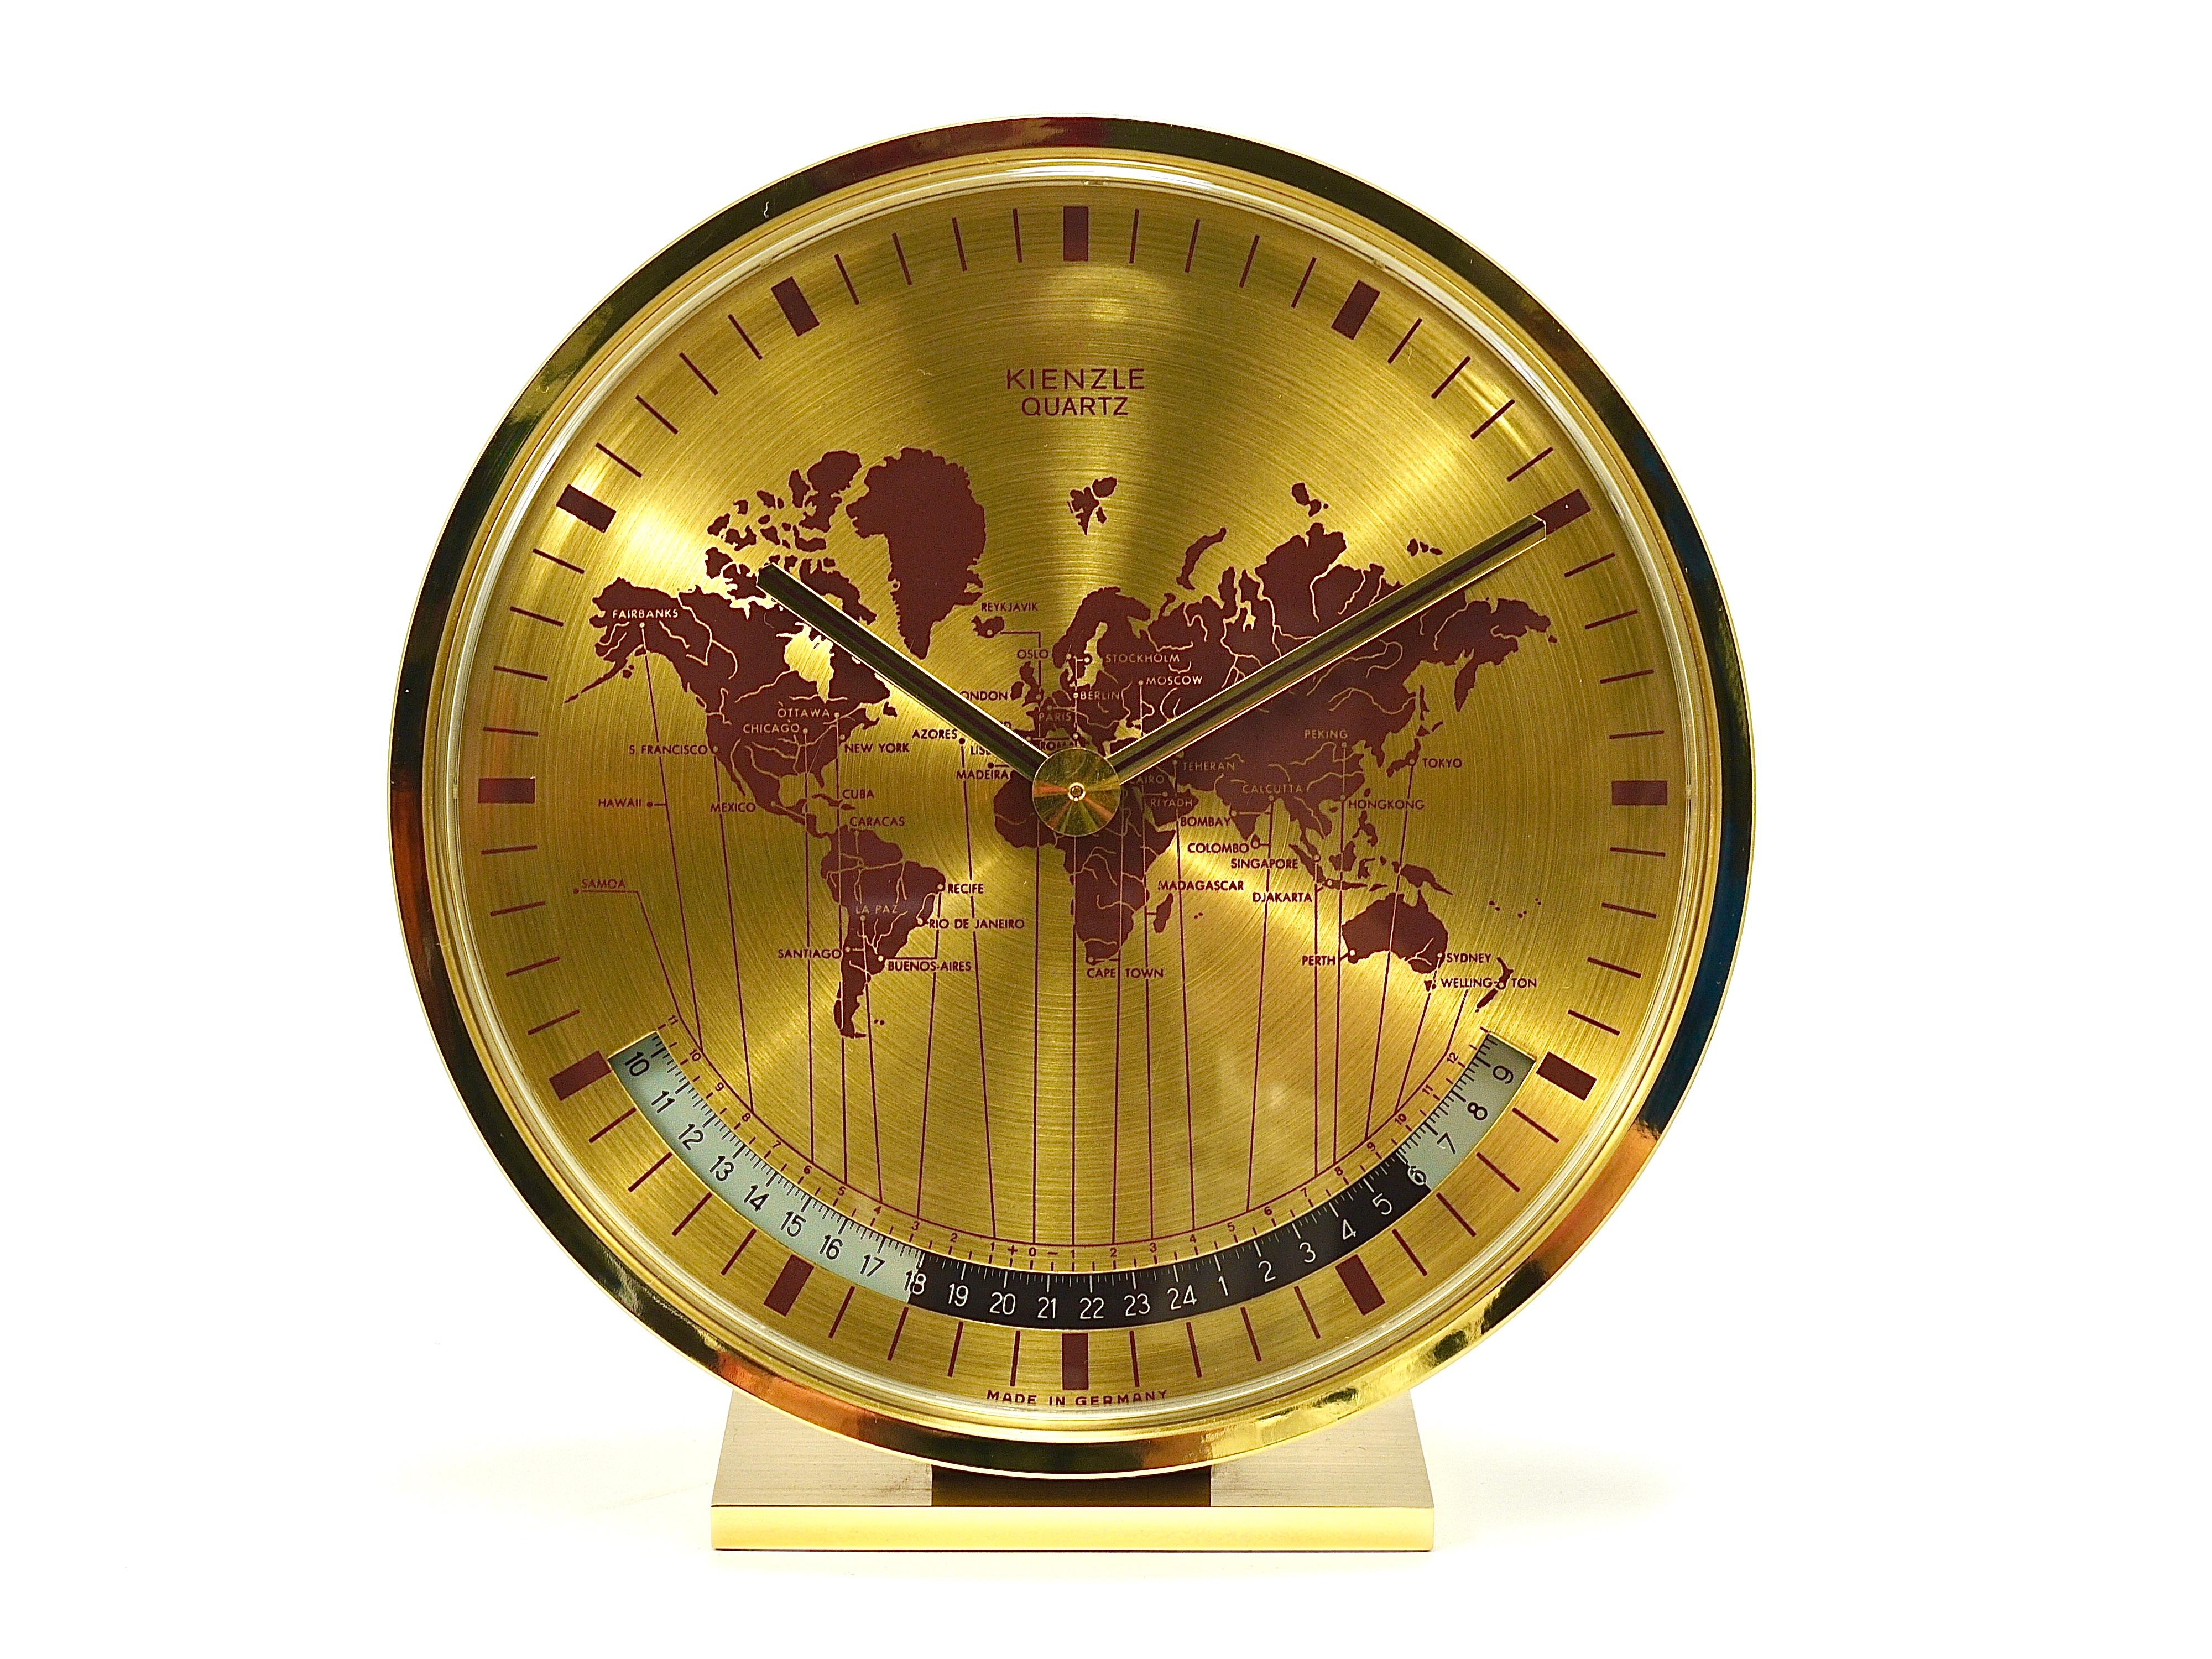 A beautiful and decorative Mid-Century Modernist solid brass Kienzle desk or table clock with a world map clocks face and world time zones. Executed in the 1960s by Kienzle in Western Germany. The housing and the base are made of solid brass. An